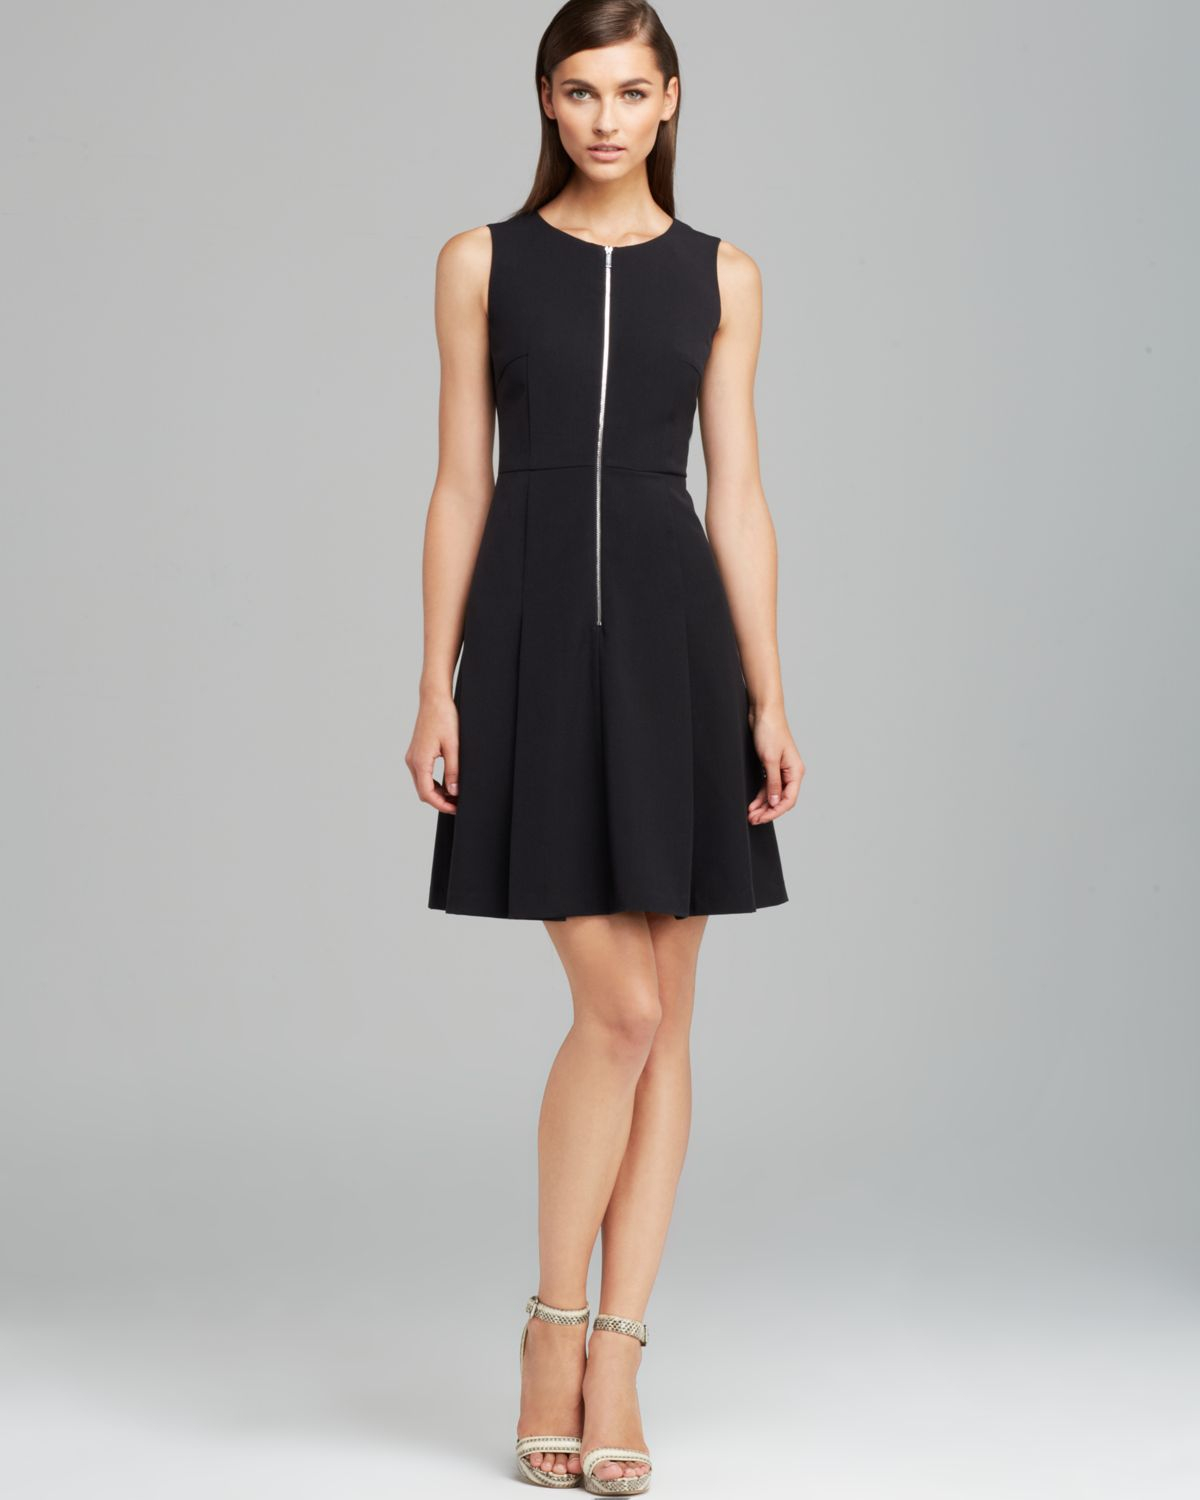 Calvin Klein Zip Front Fit and Flare Dress in Black | Lyst